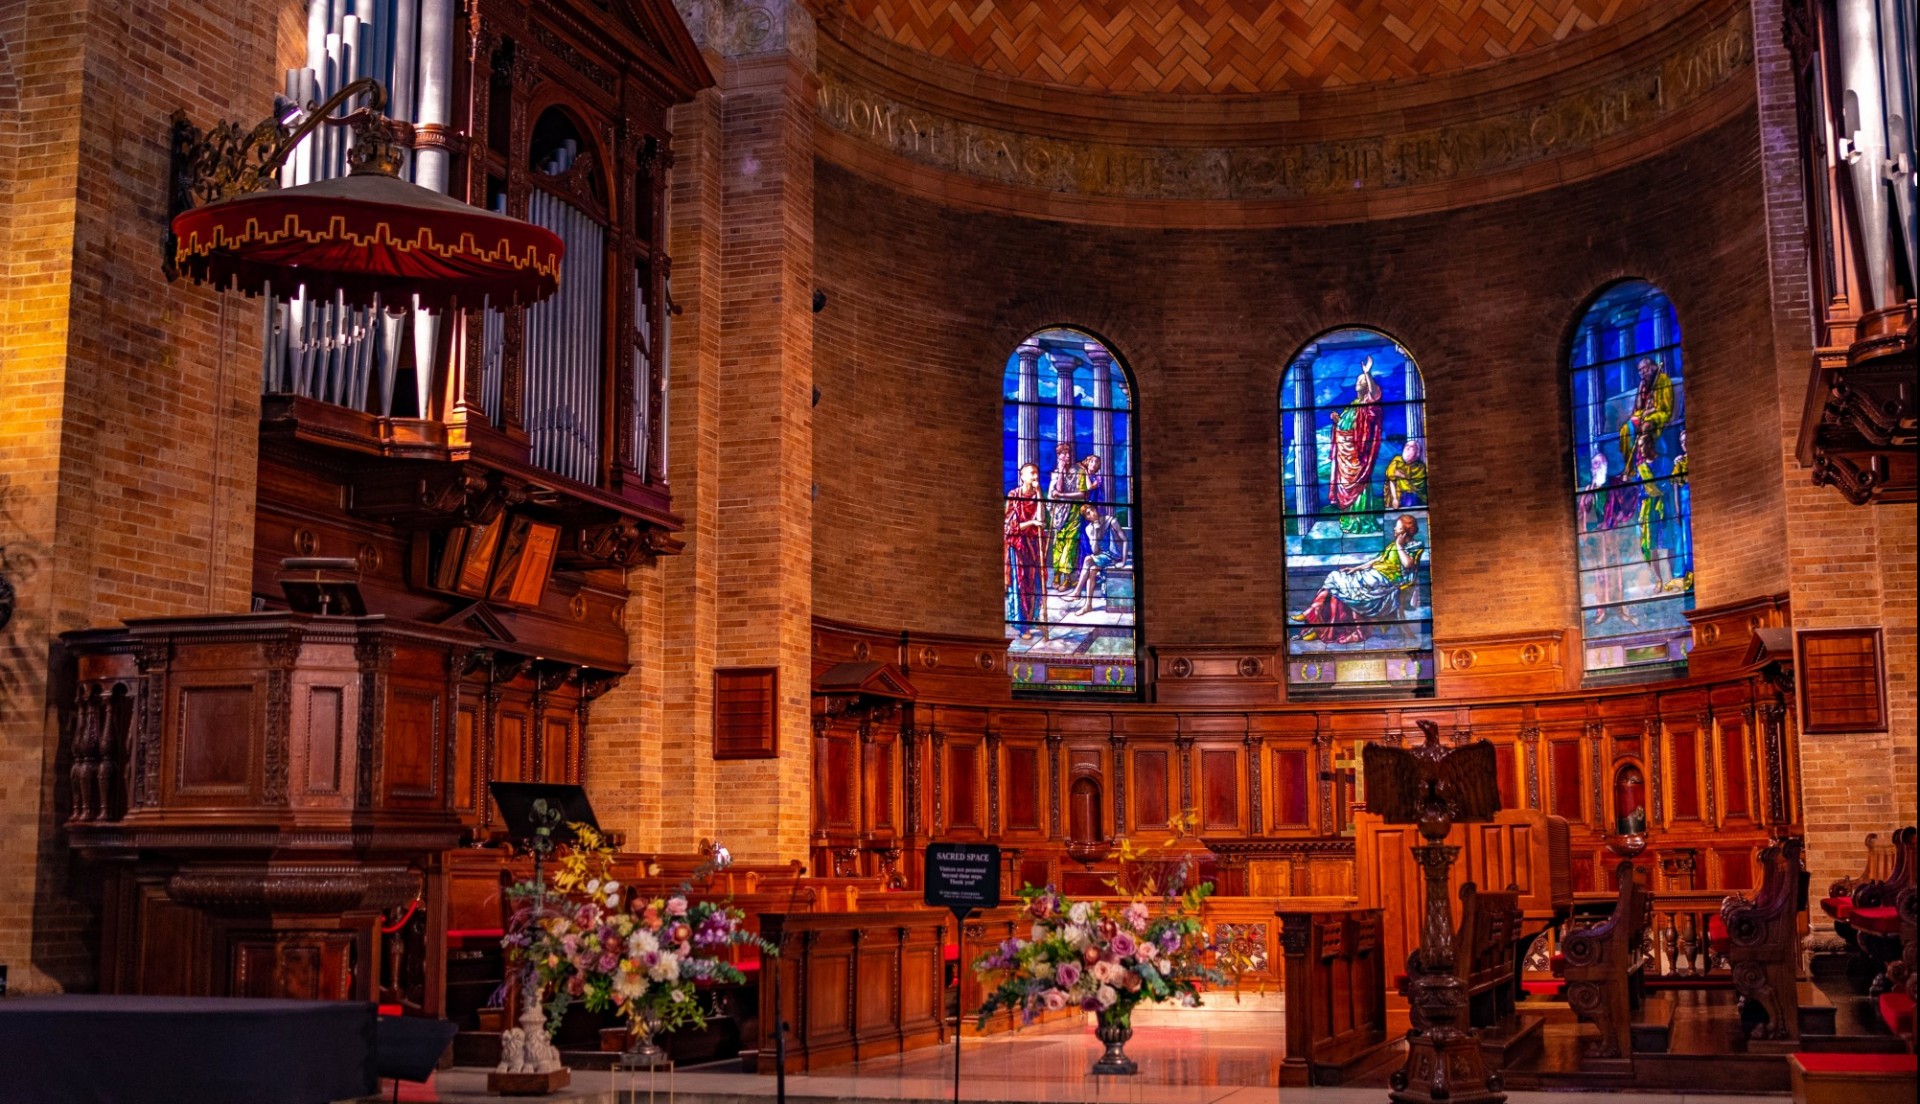 Saint Paul's Chapel features one of New York City's finest pipe organs, featuring 5,348 pipes.